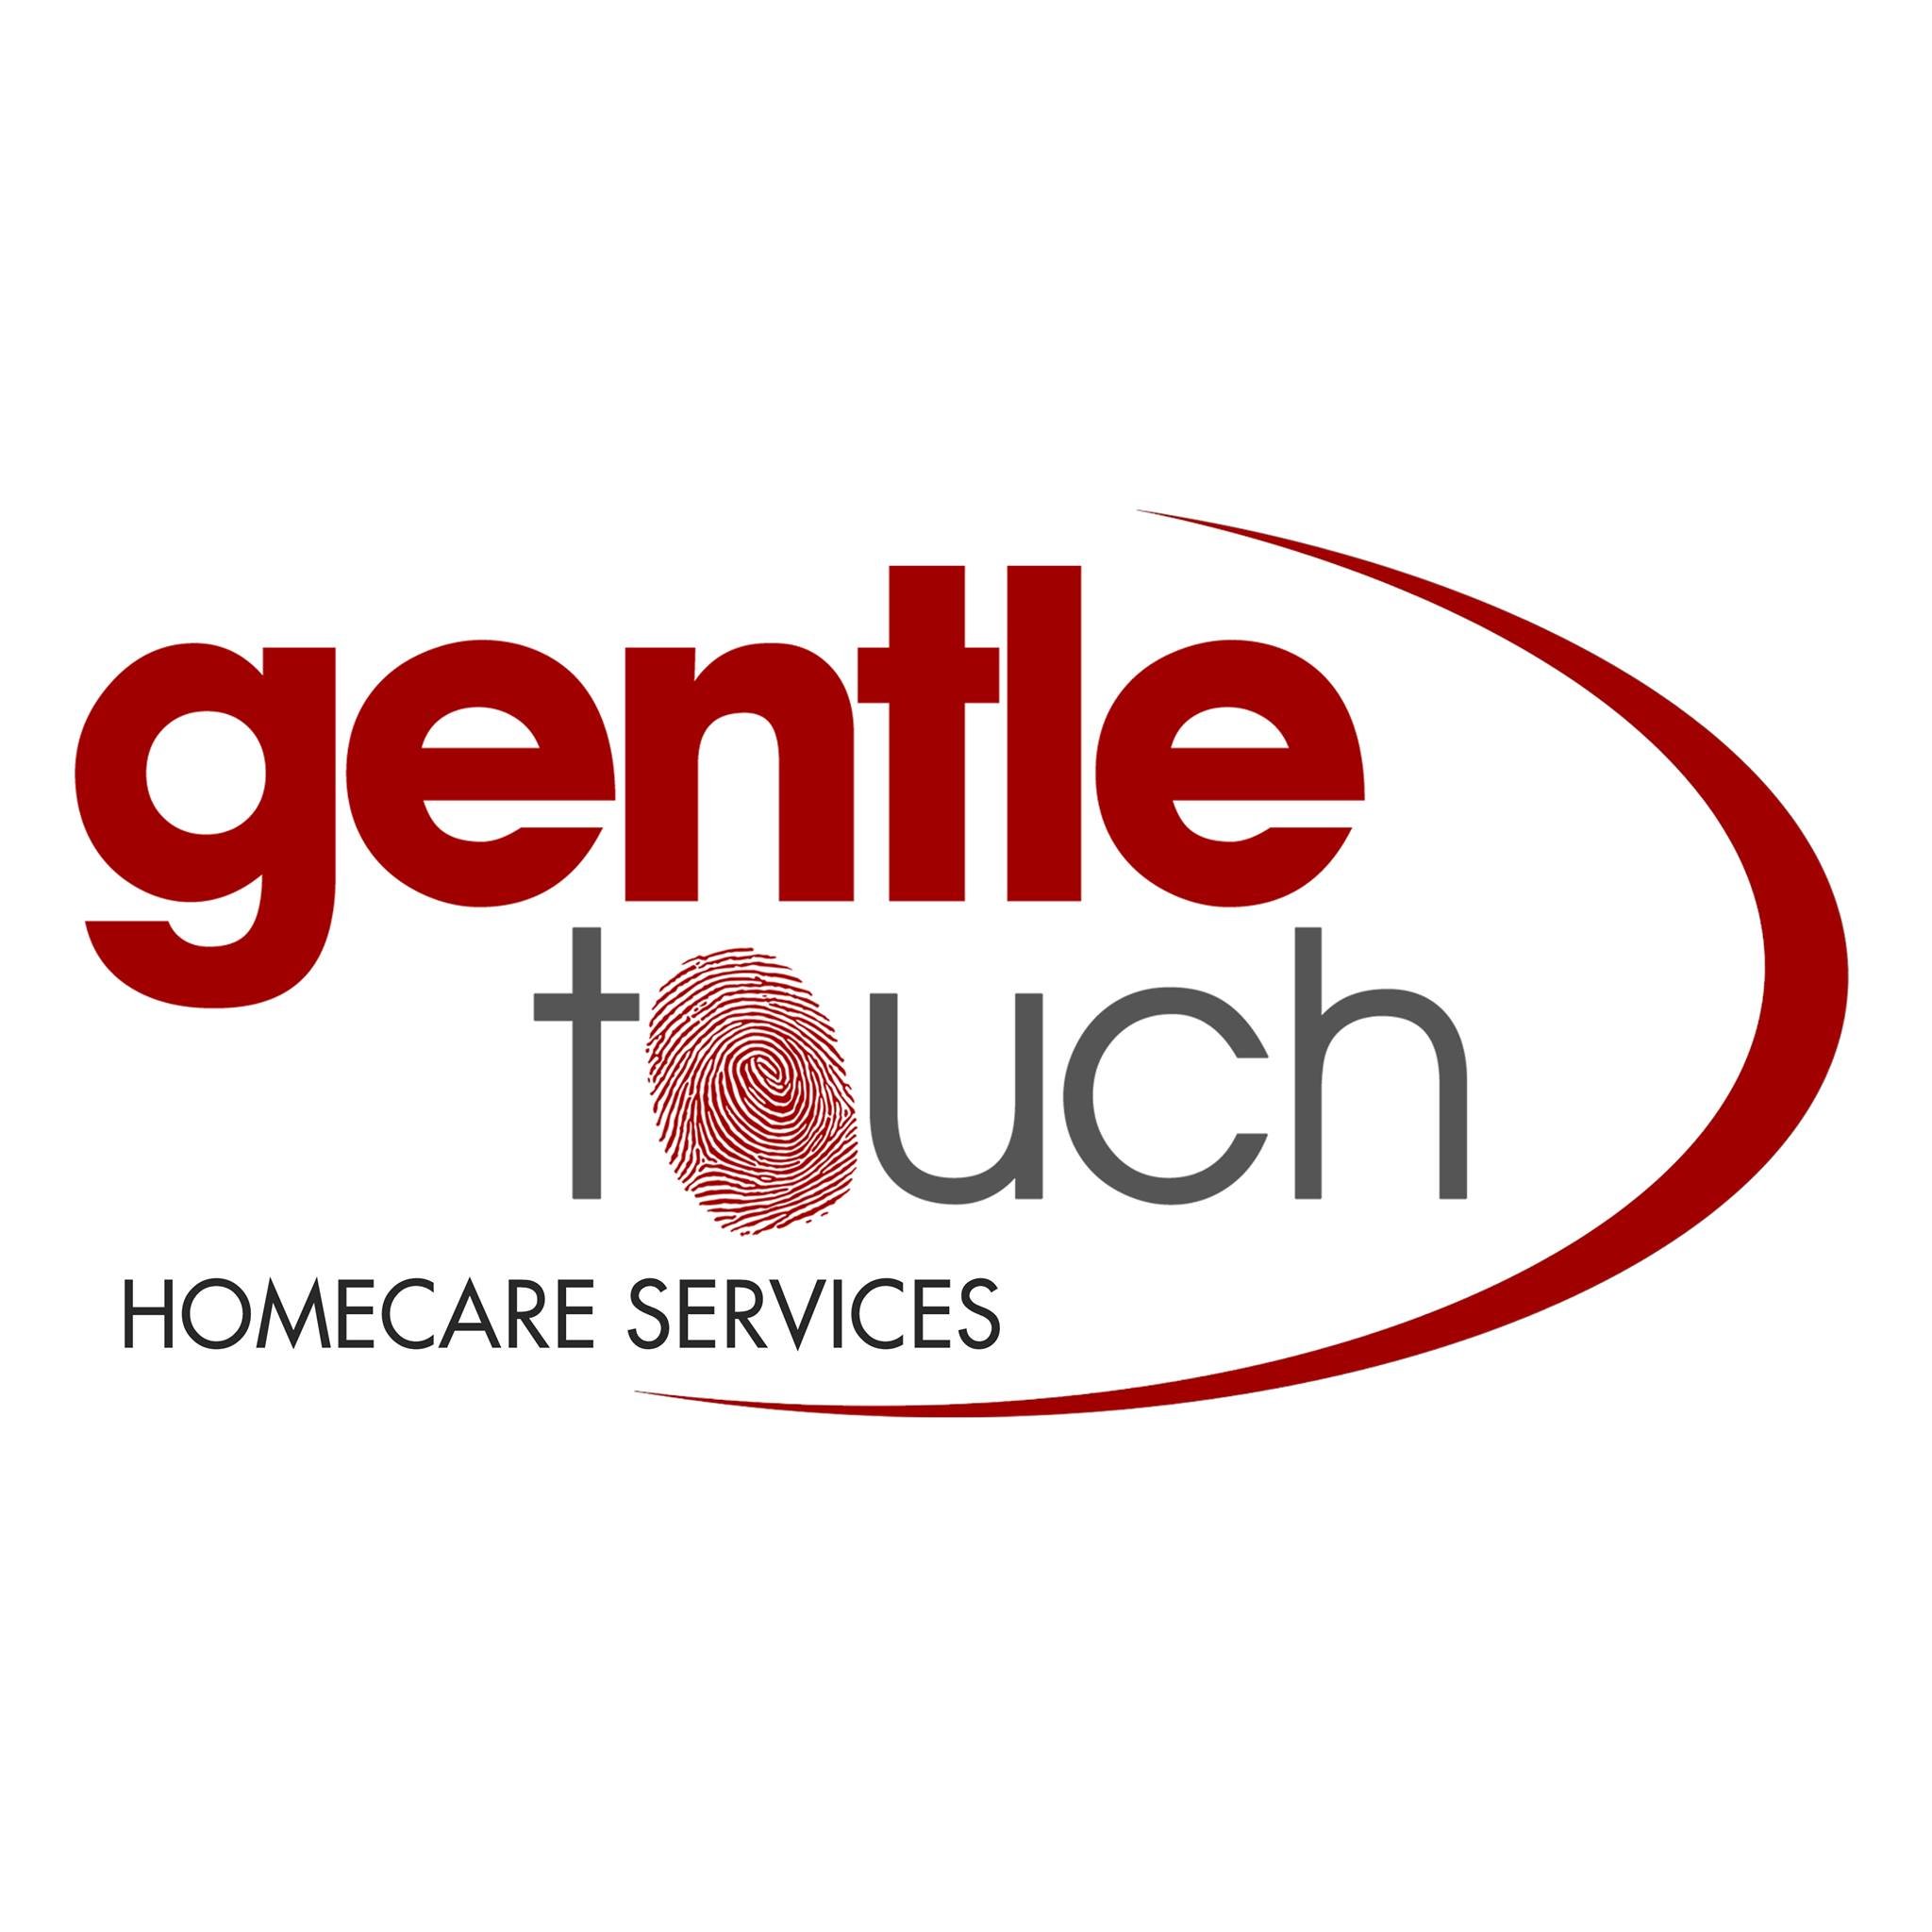 Home care agency that isn't your traditional home care. All clients are treated with dignity and all are top priority.